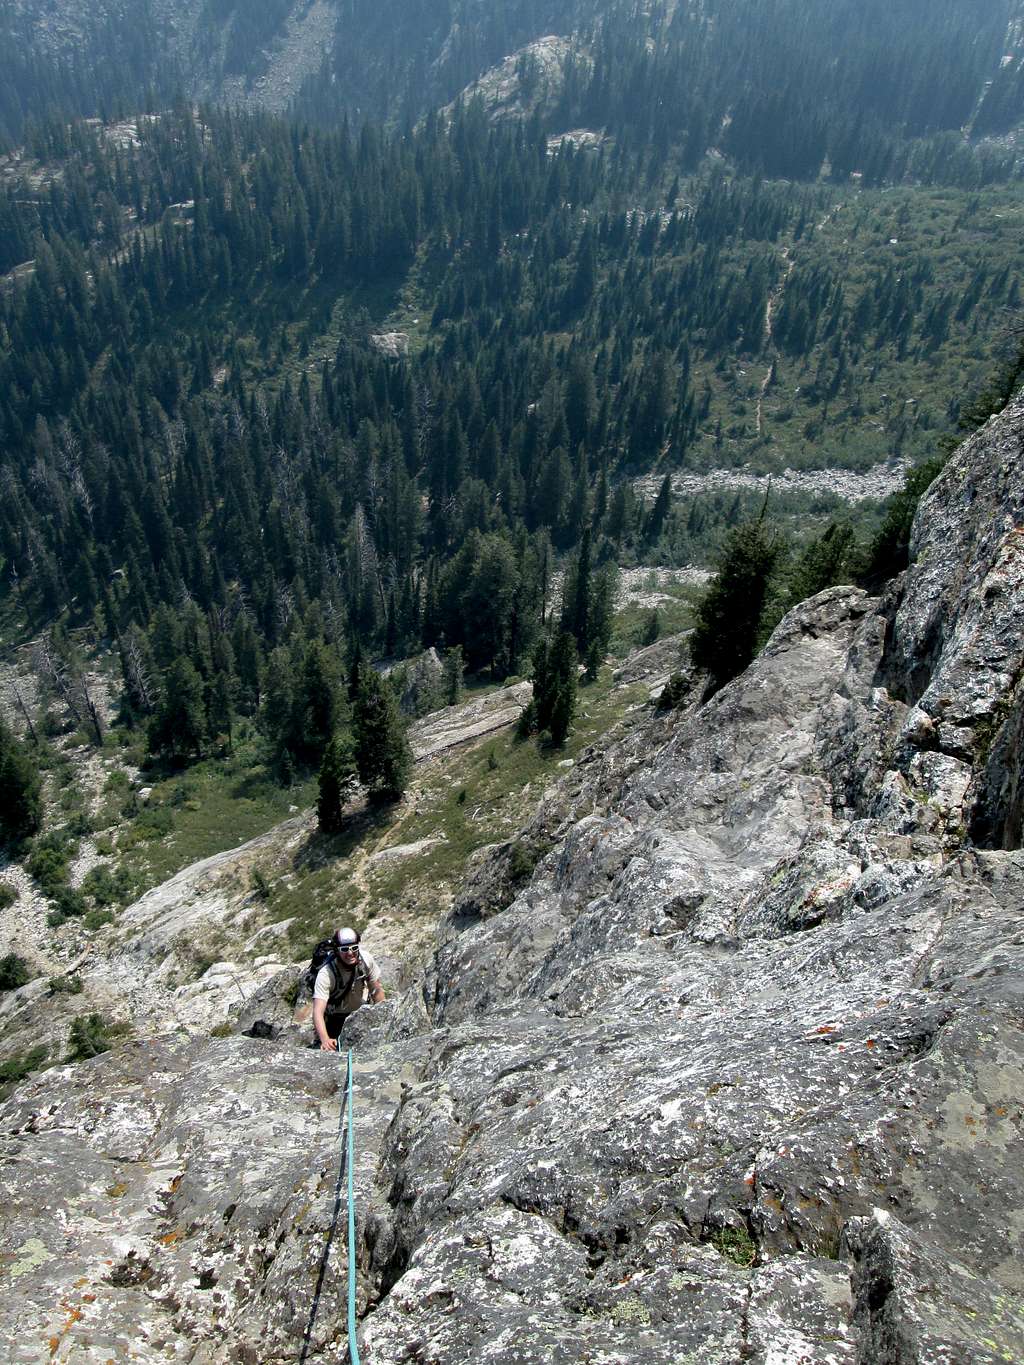 JD following at the end of pitch 3, South Ridge/Face of Baxter's Pinnacle, Teton Range, WY